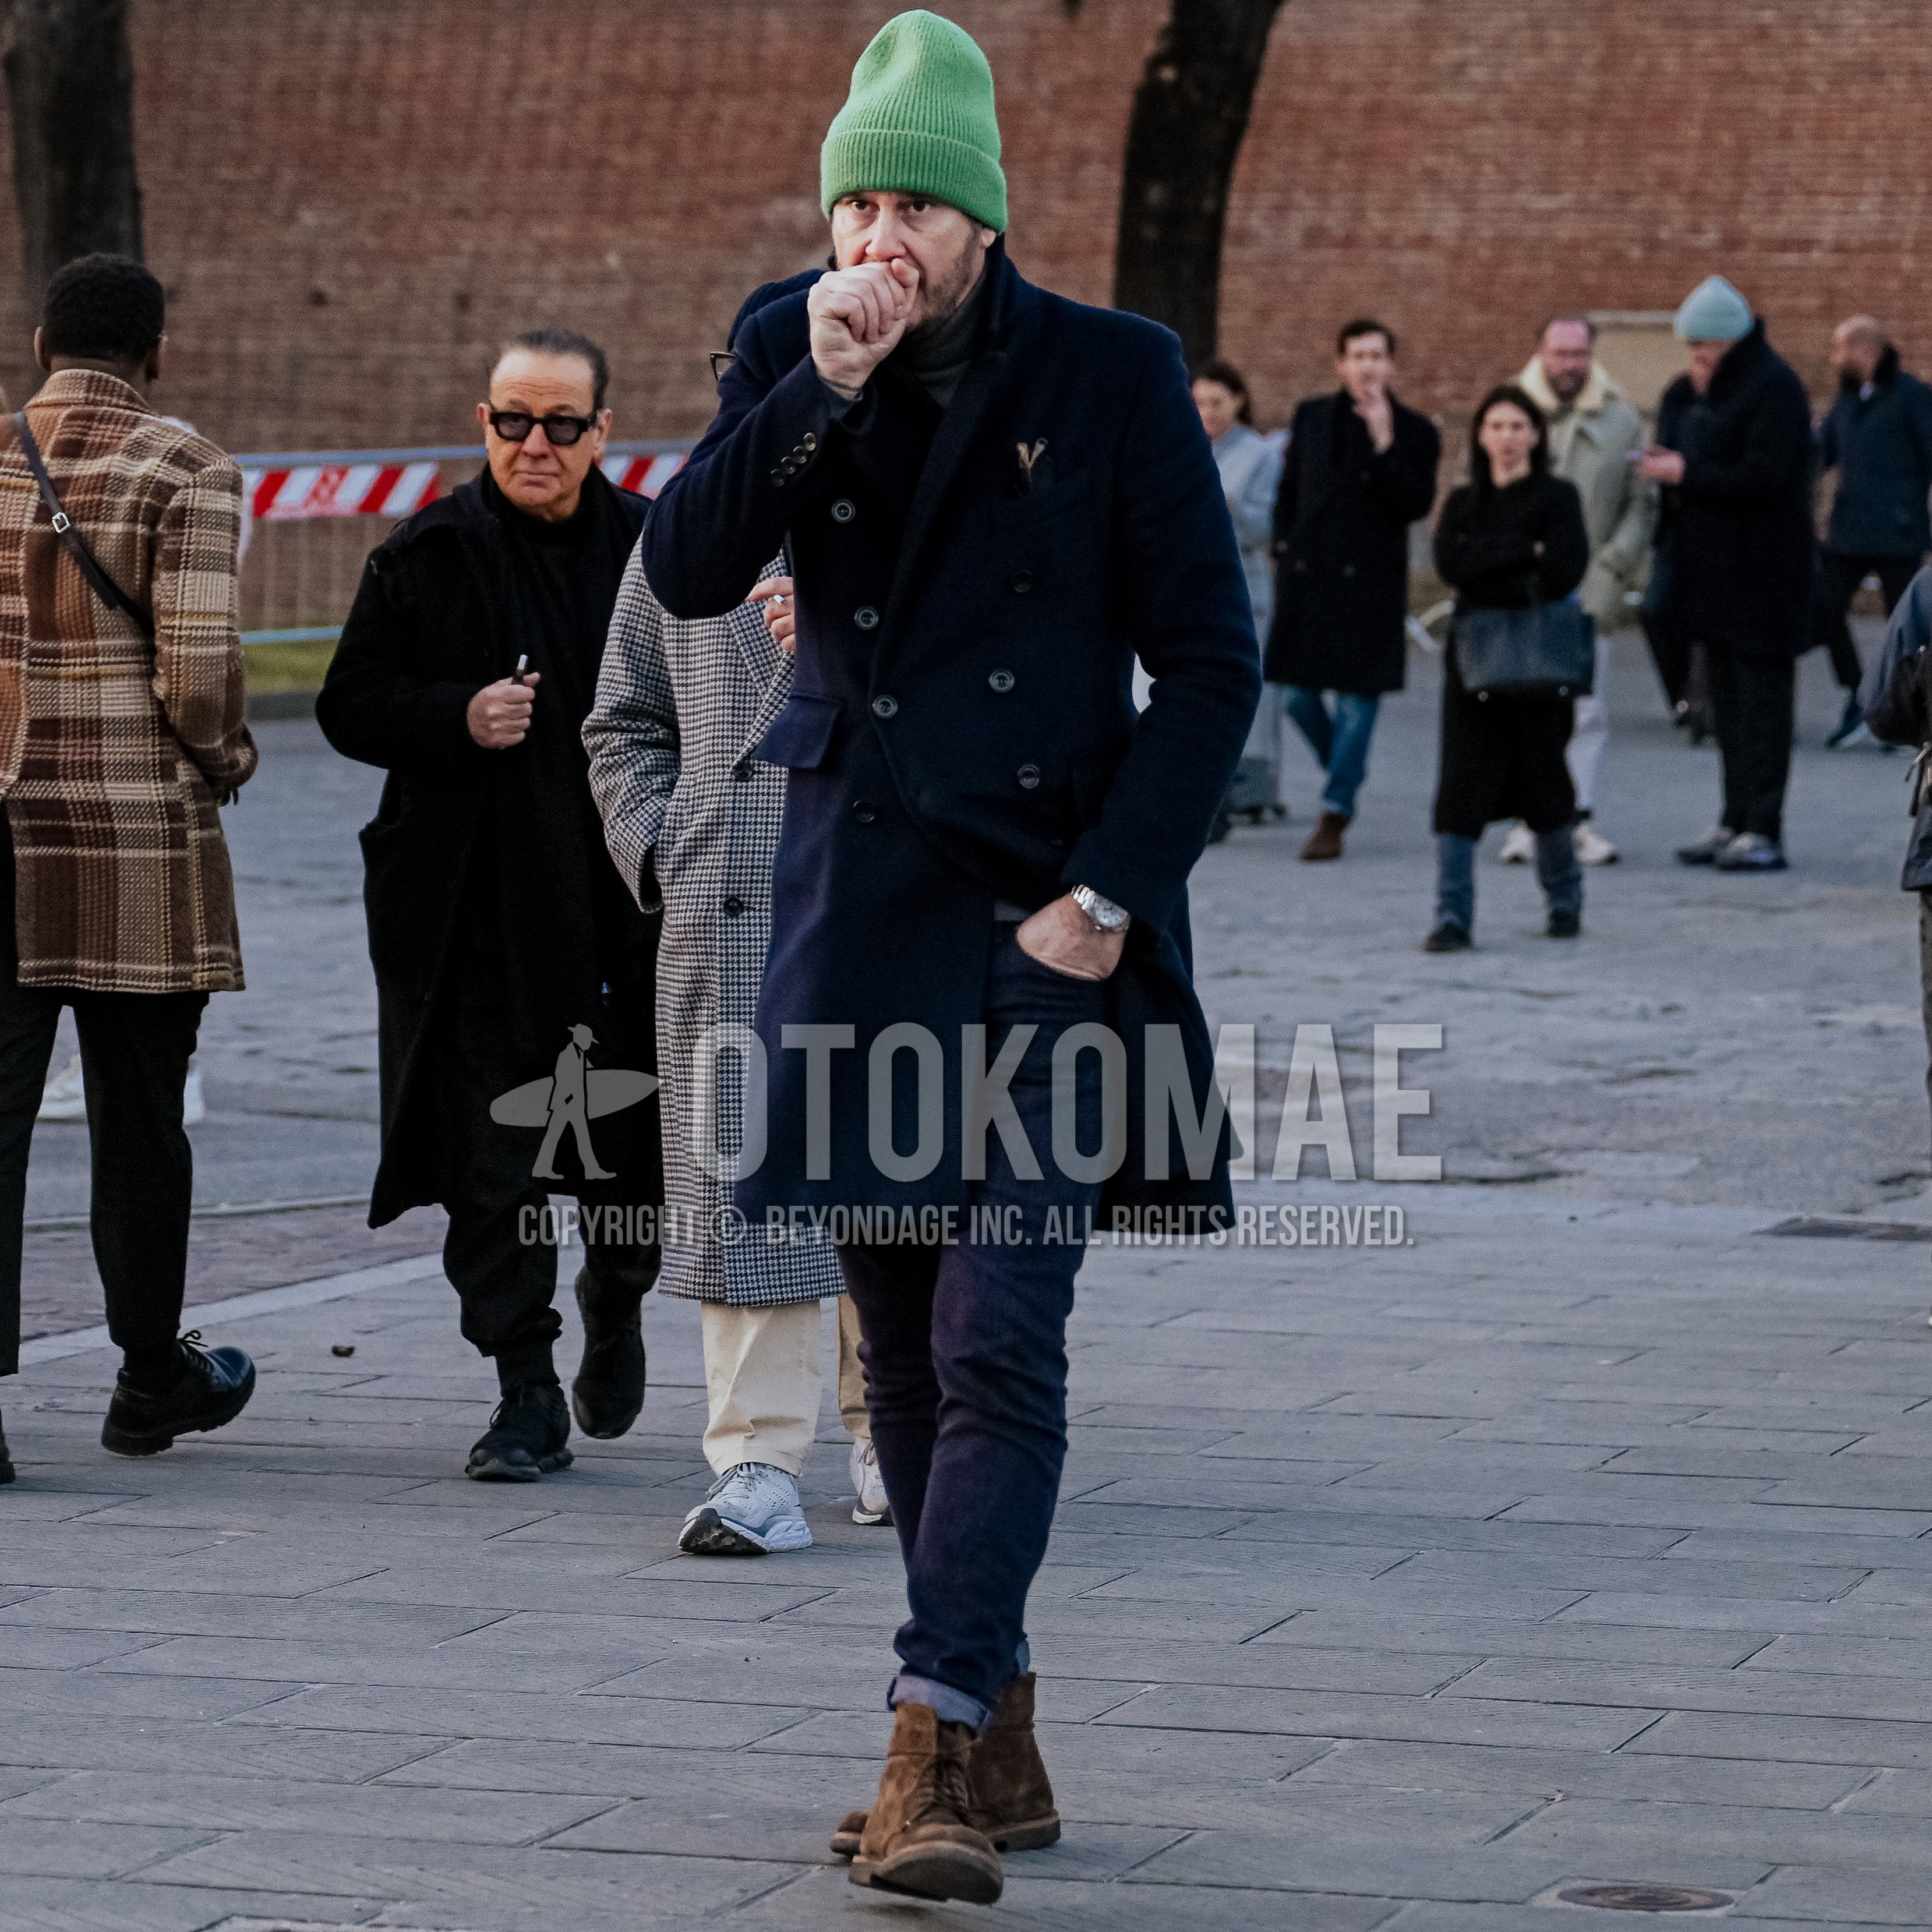 Men's autumn winter outfit with green plain knit cap, navy plain ulster coat, navy bottoms skinny pants, brown work boots.